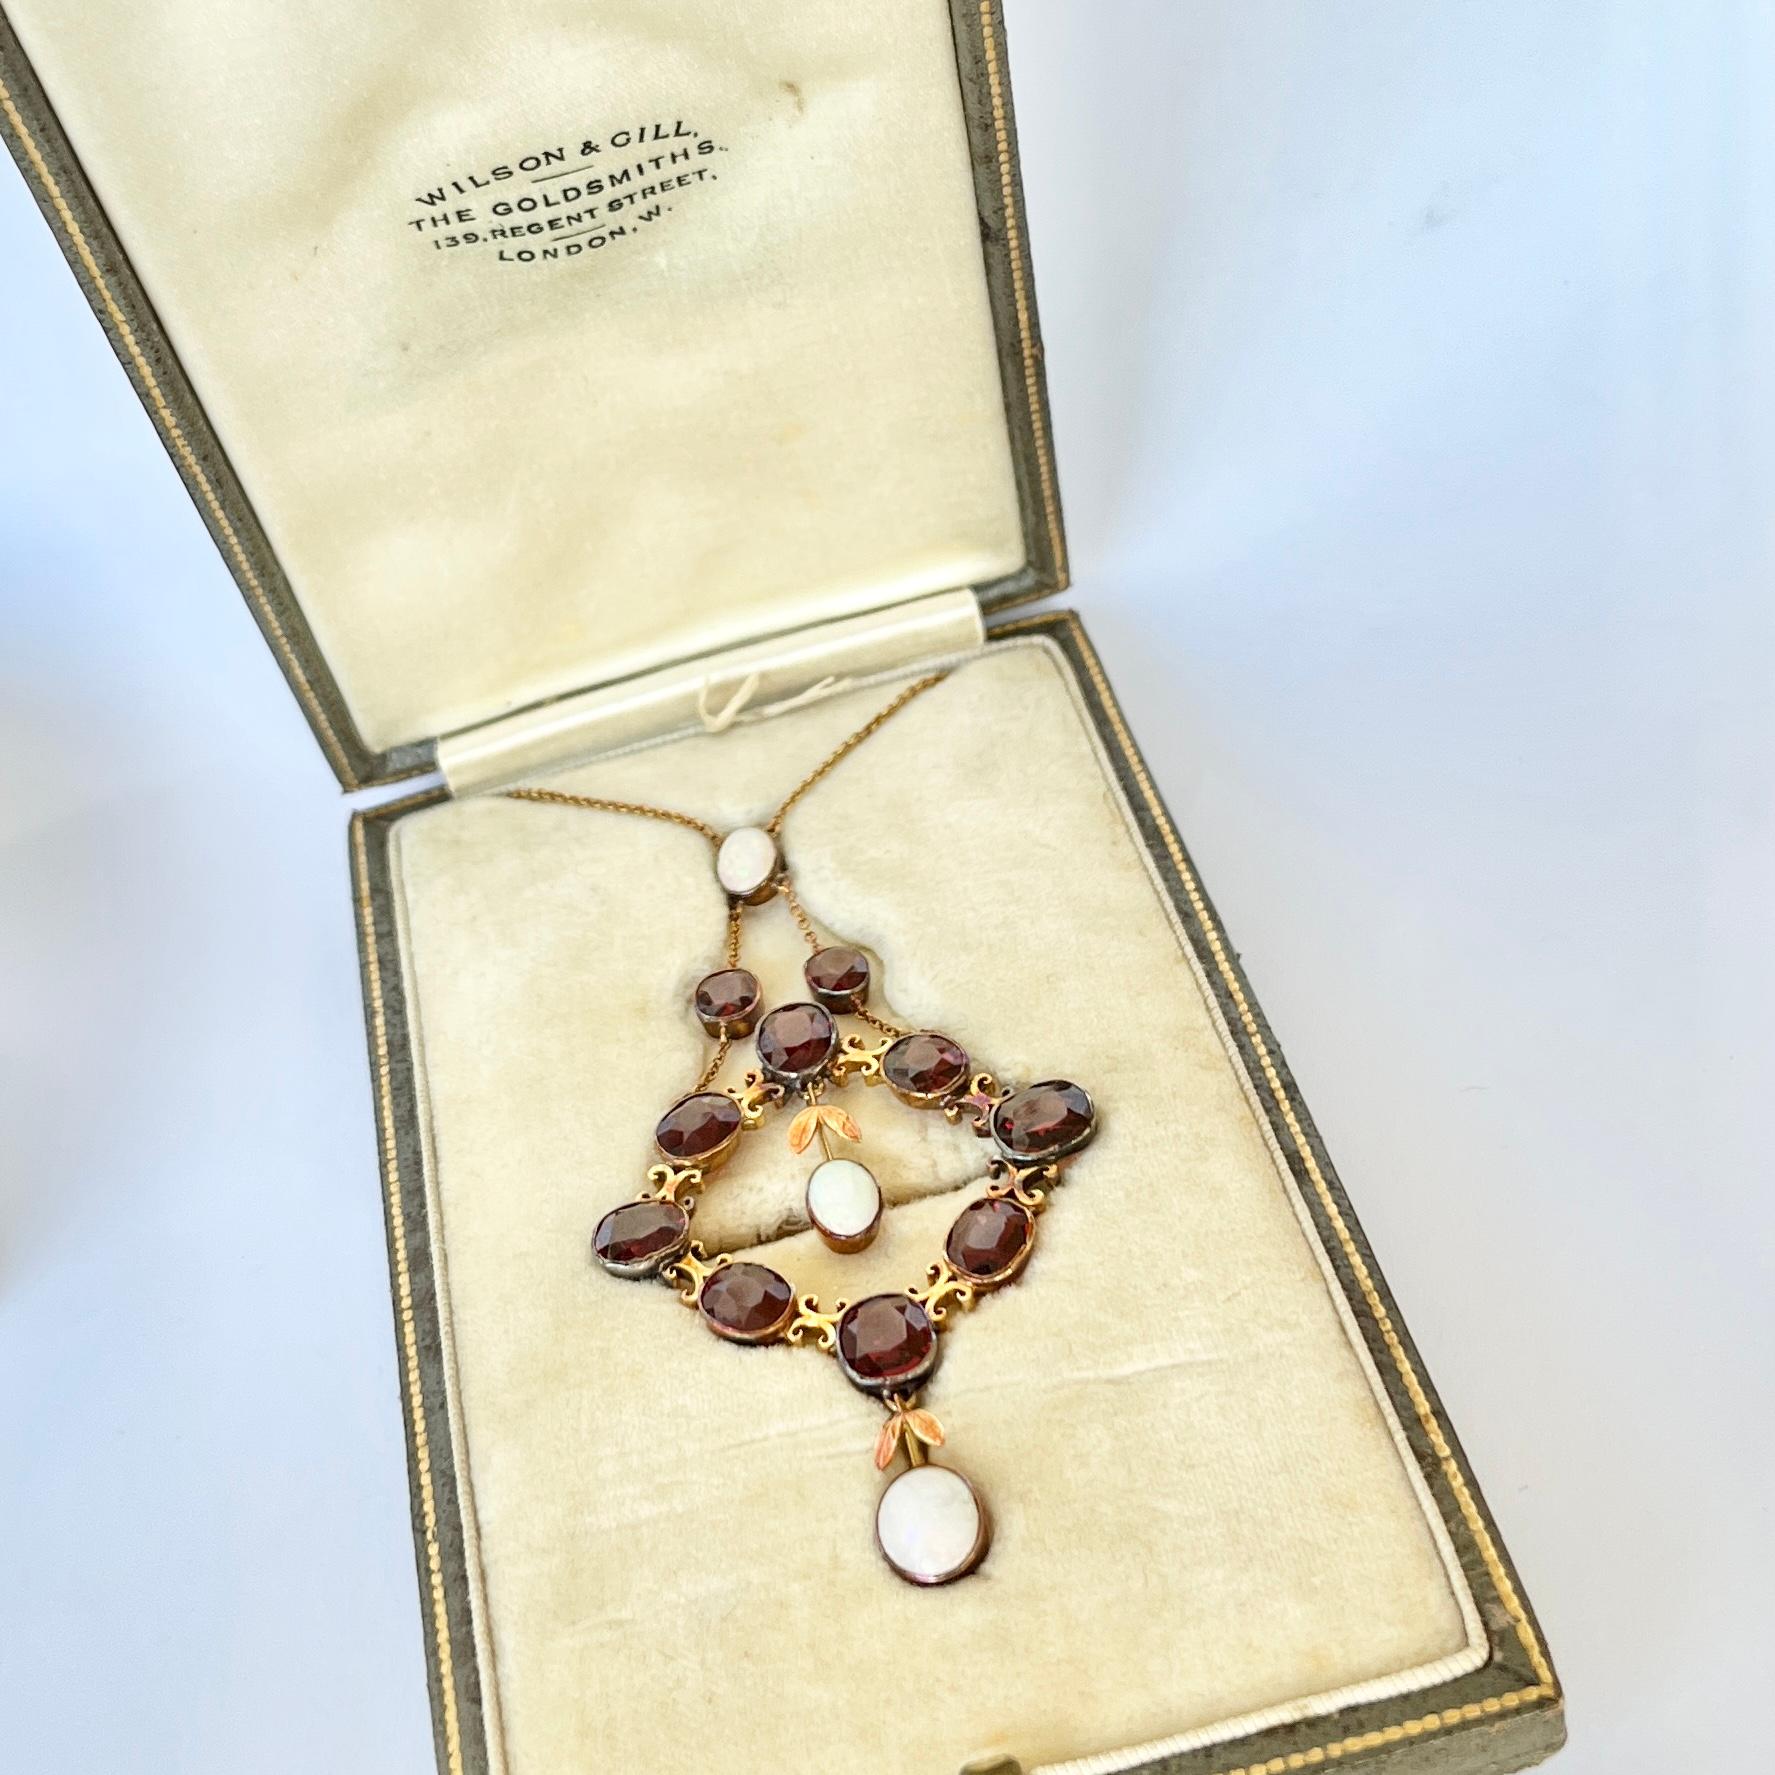 This sweet pendant holds garnets and colourful opals. This pendant could be worn as a brooch also. The amount of detail on this pendant is simply stunning. Modelled in 9ct gold and comes in original fitted box. 

Drop from loop: 72mm
Pendant Width: